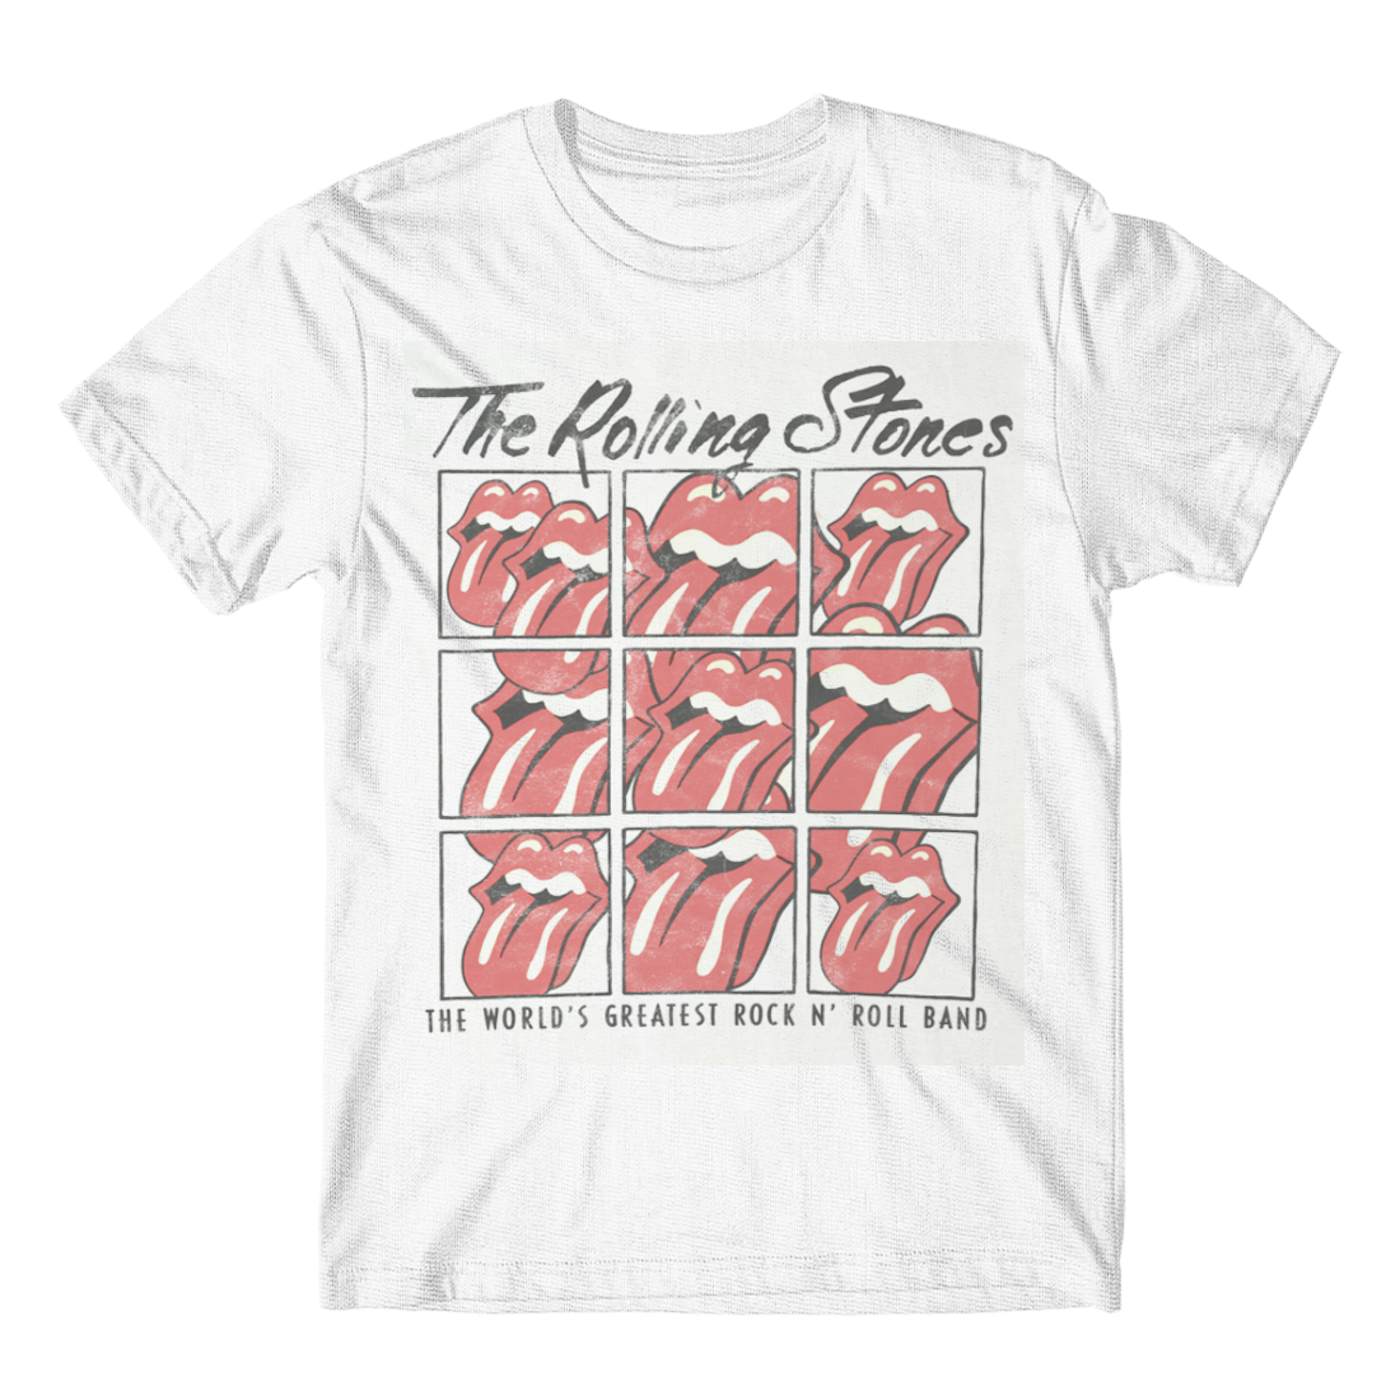 The Rolling Stones- T-Shirt - World's Greatest Rock 'N' Roll Band (Bolur)